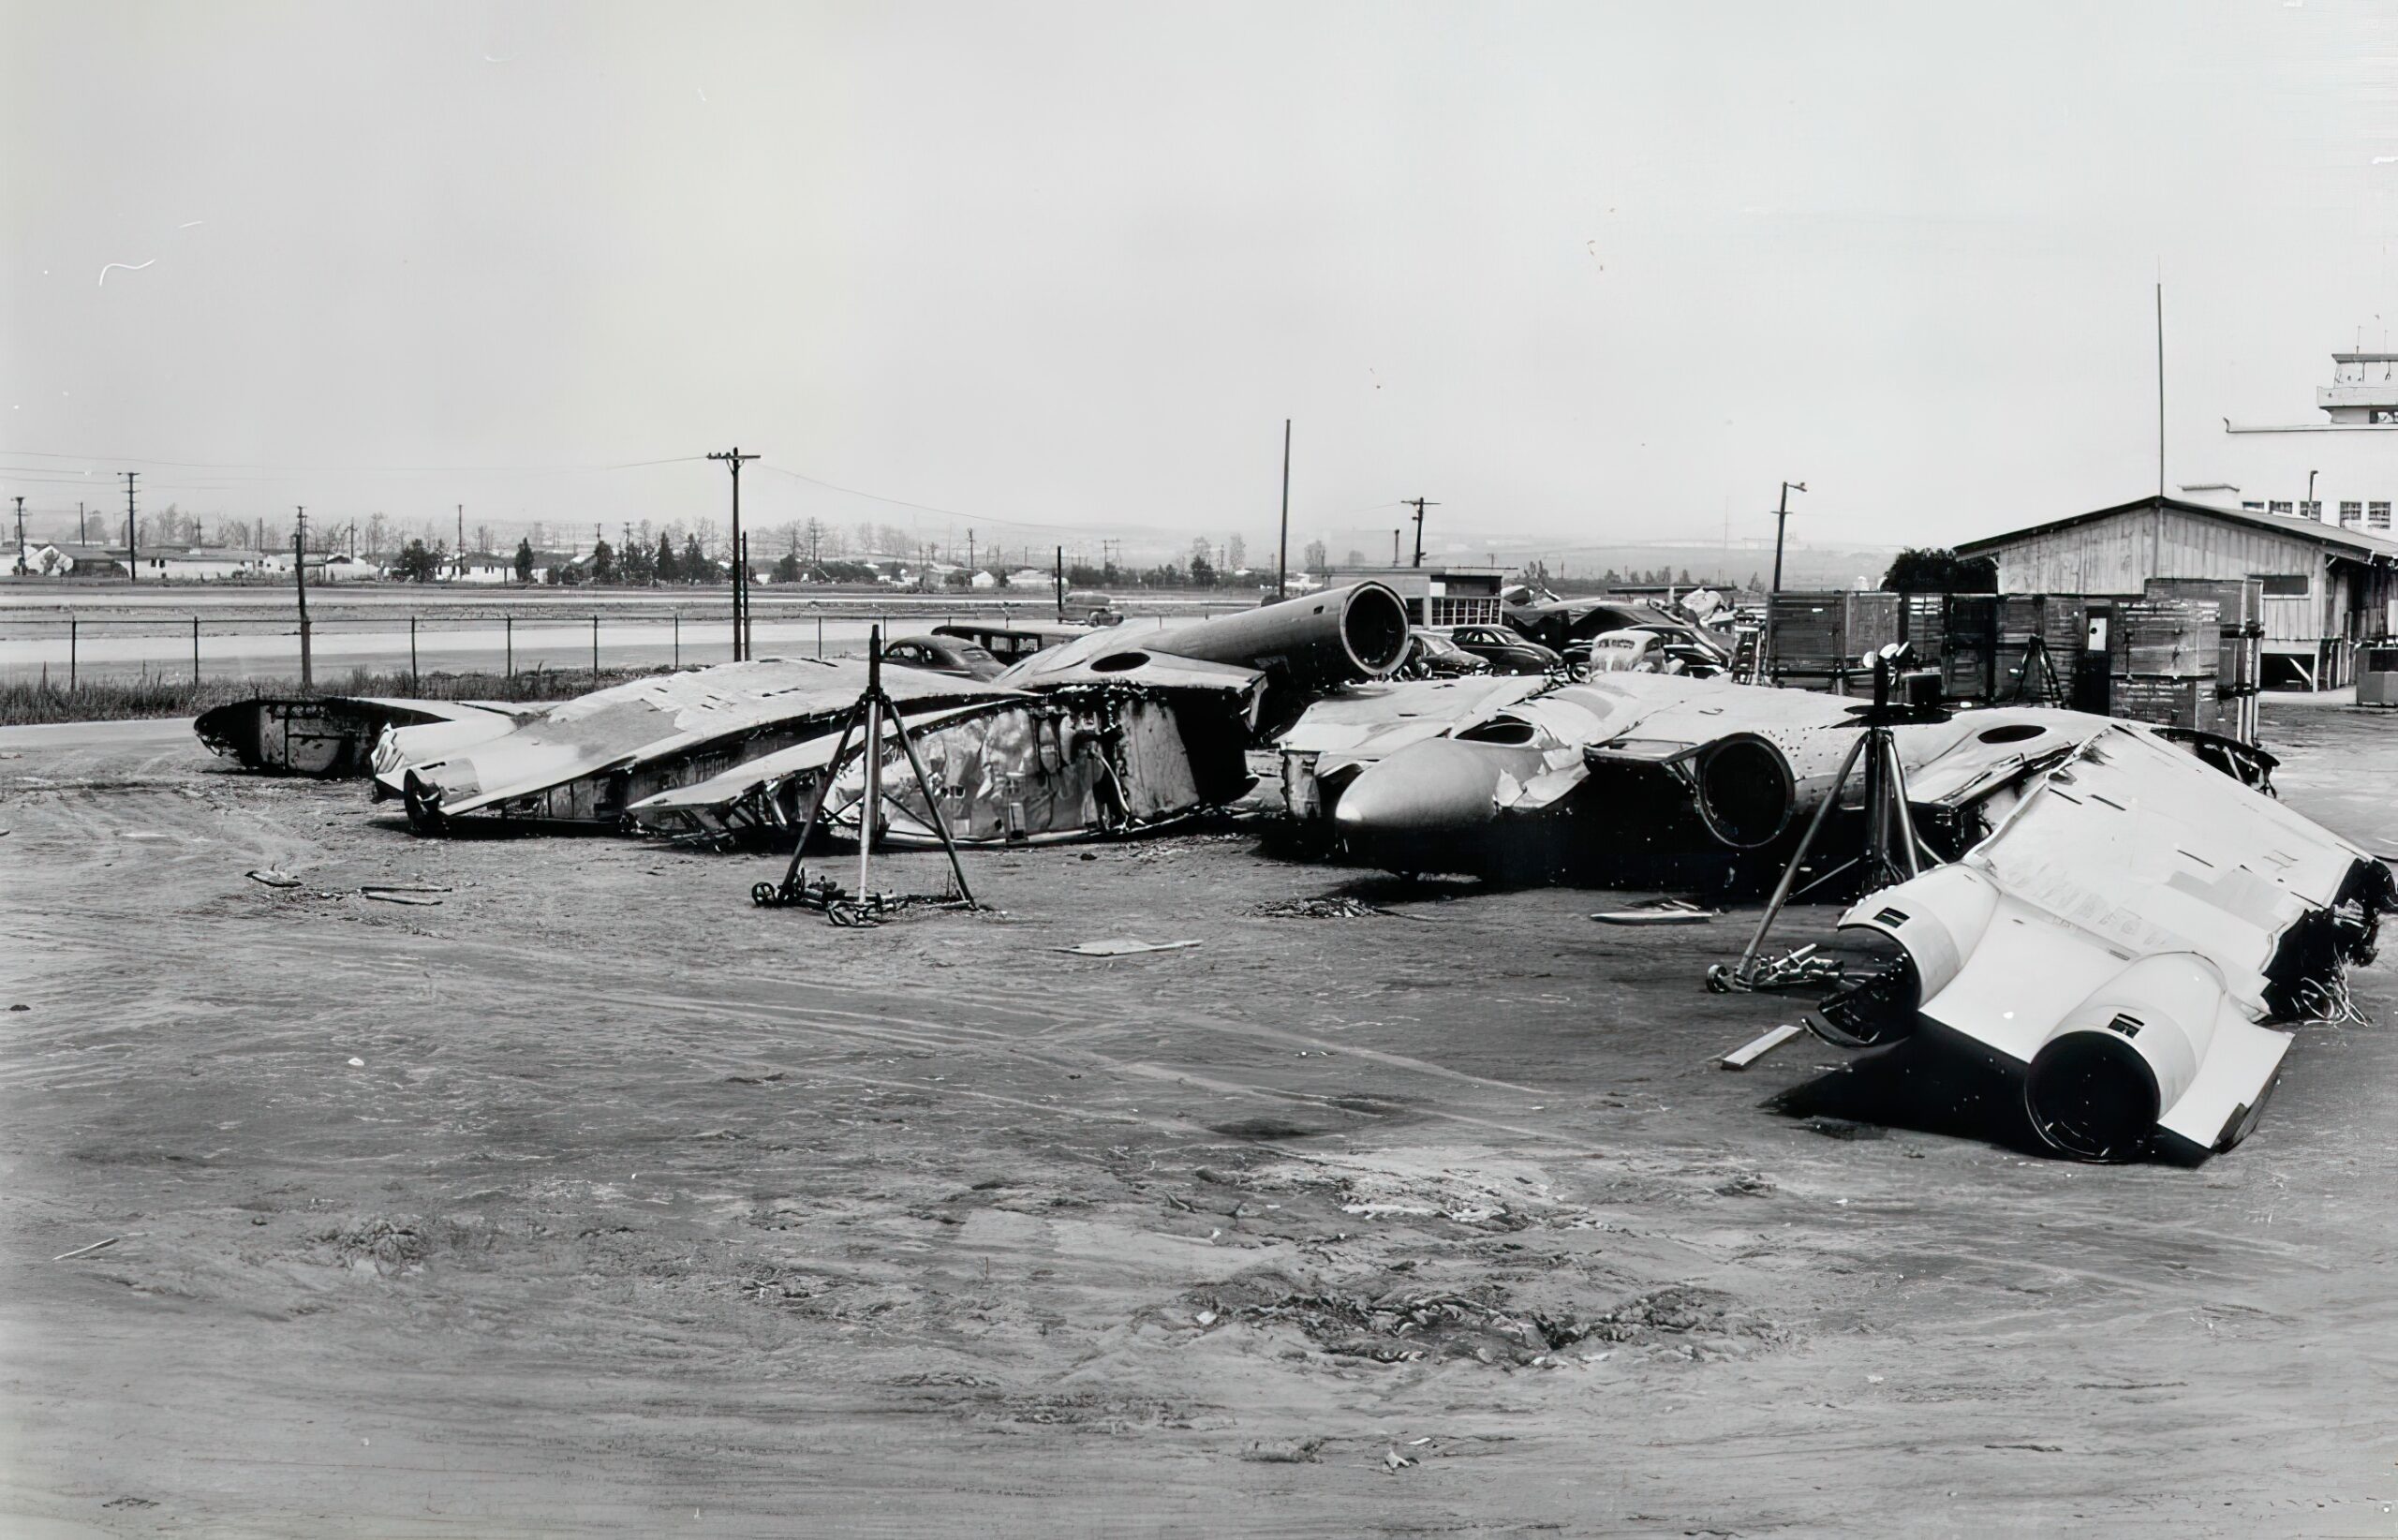 The entire run of XB-35s and YB-49s was dismantled. None of the airframes were saved for museums or display purposes